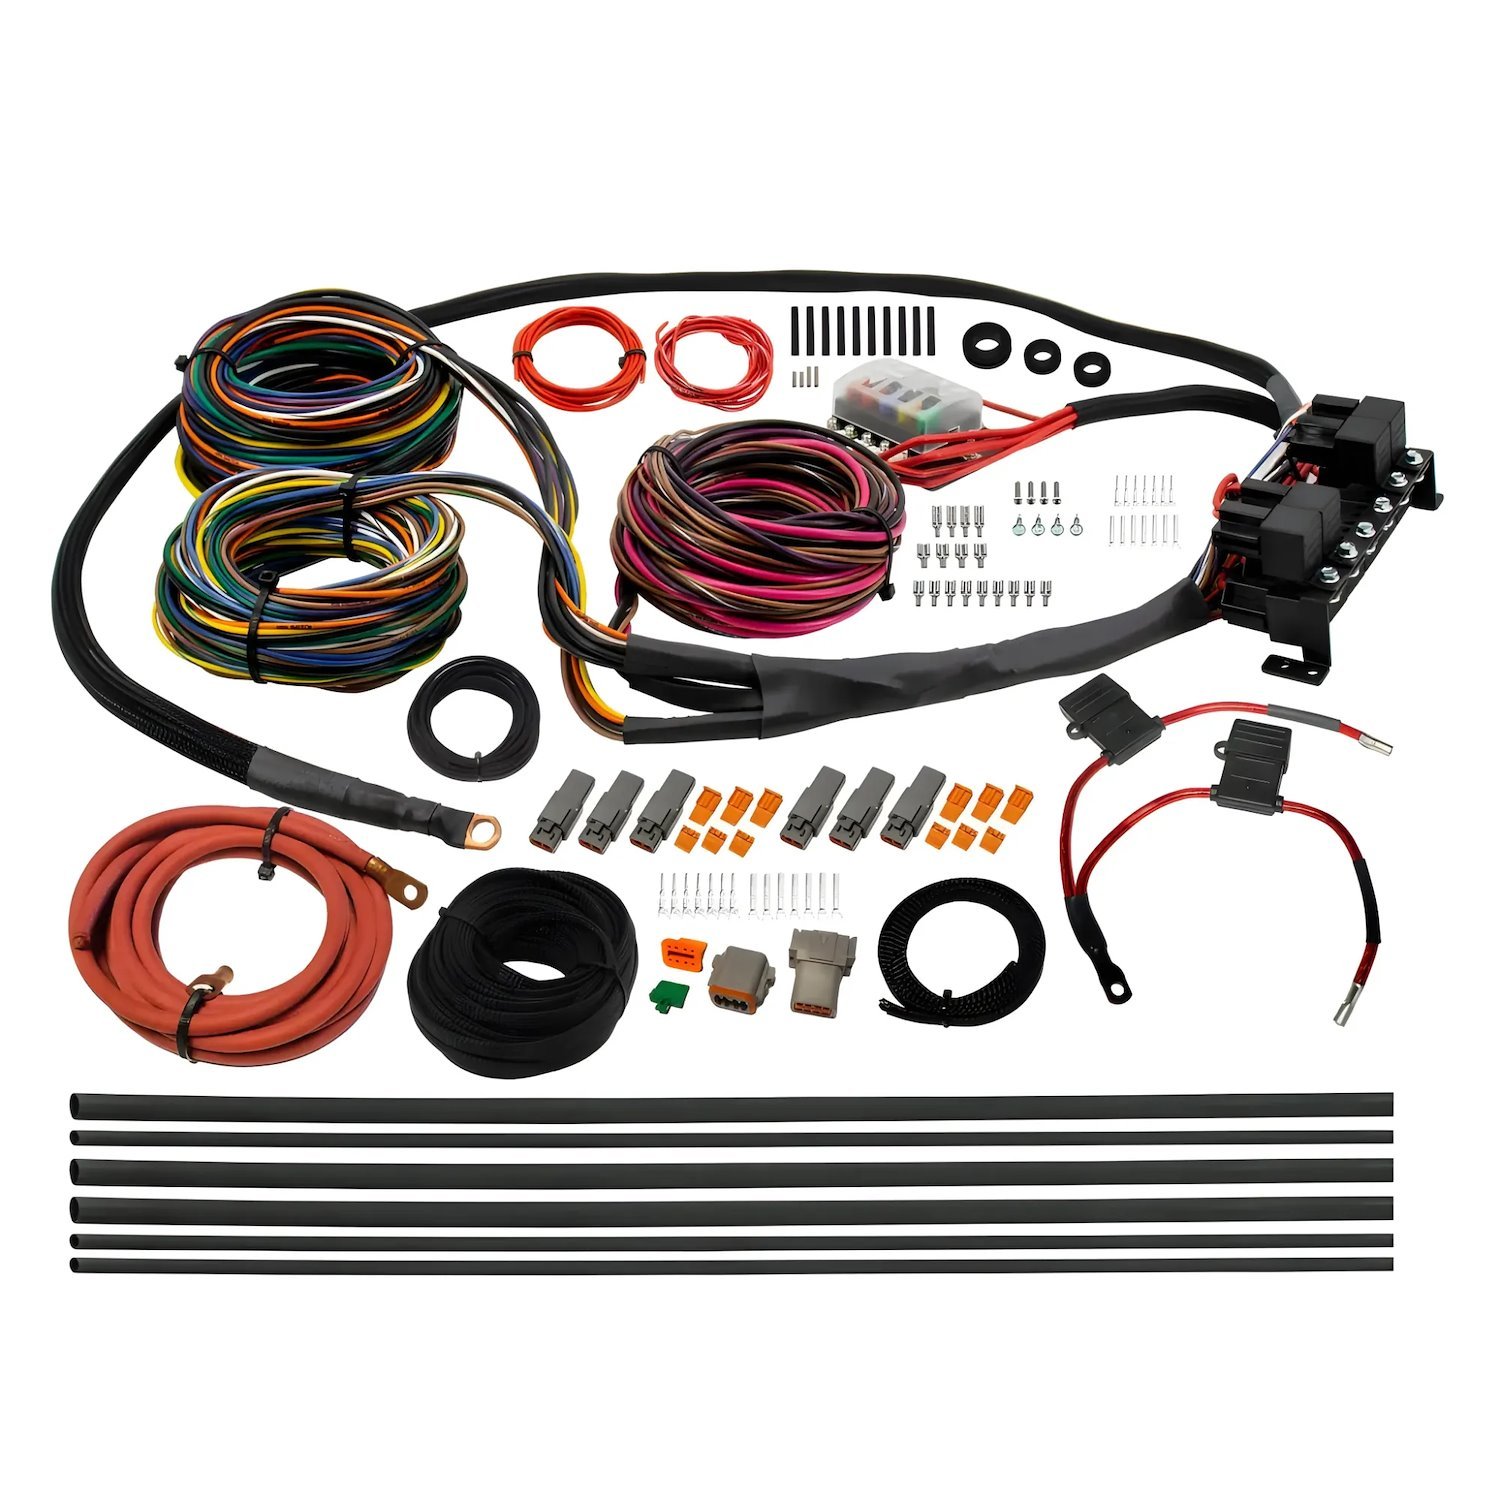 12-11500-S2 DIY Wiring Harness, Stage 2